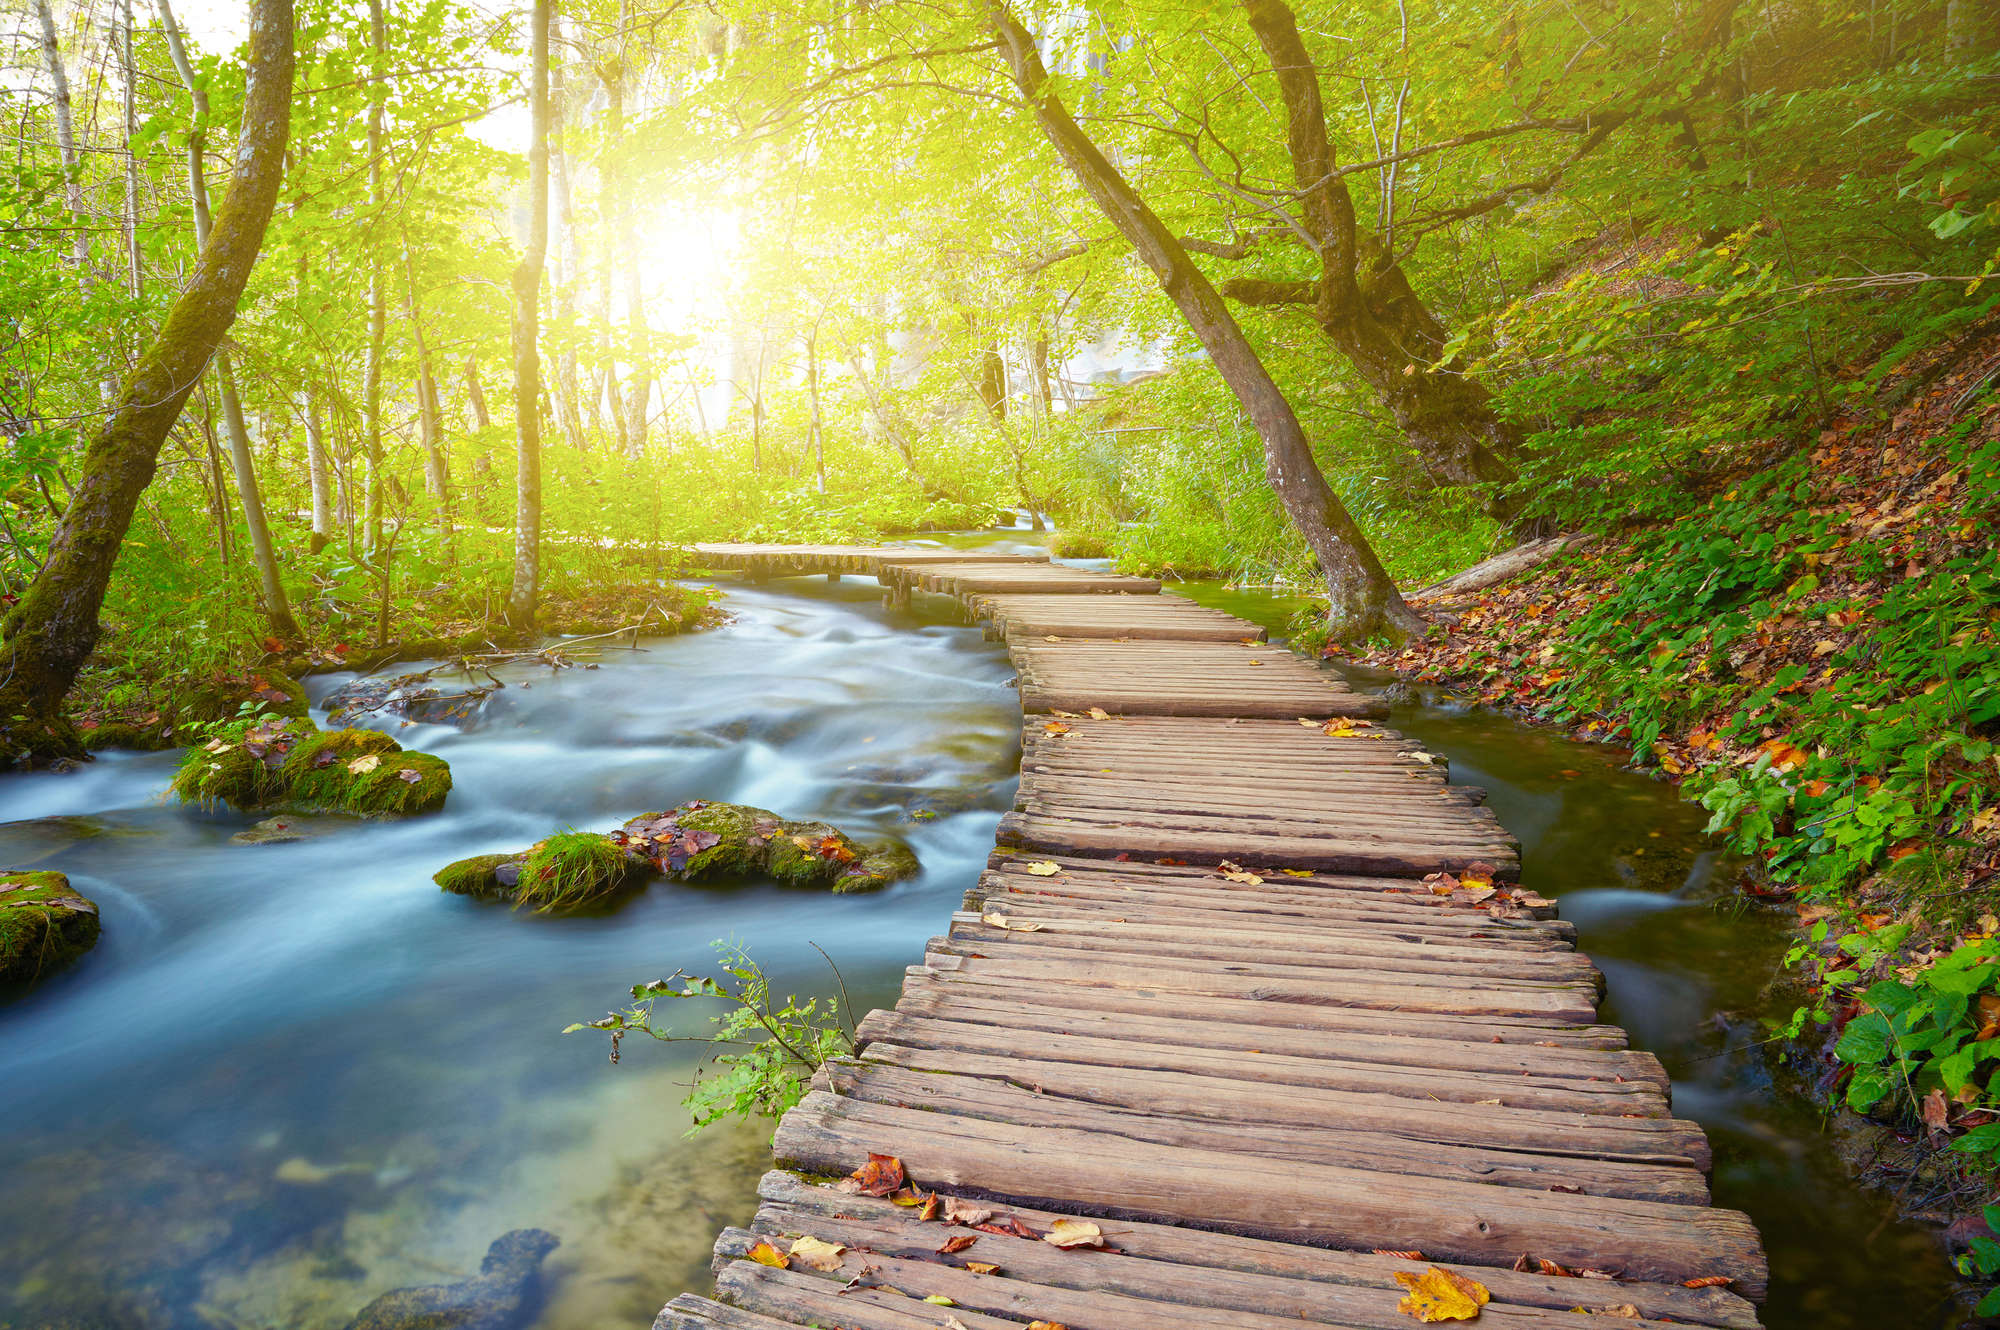             Nature mural river in the forest with wooden bridge on structural nonwoven
        